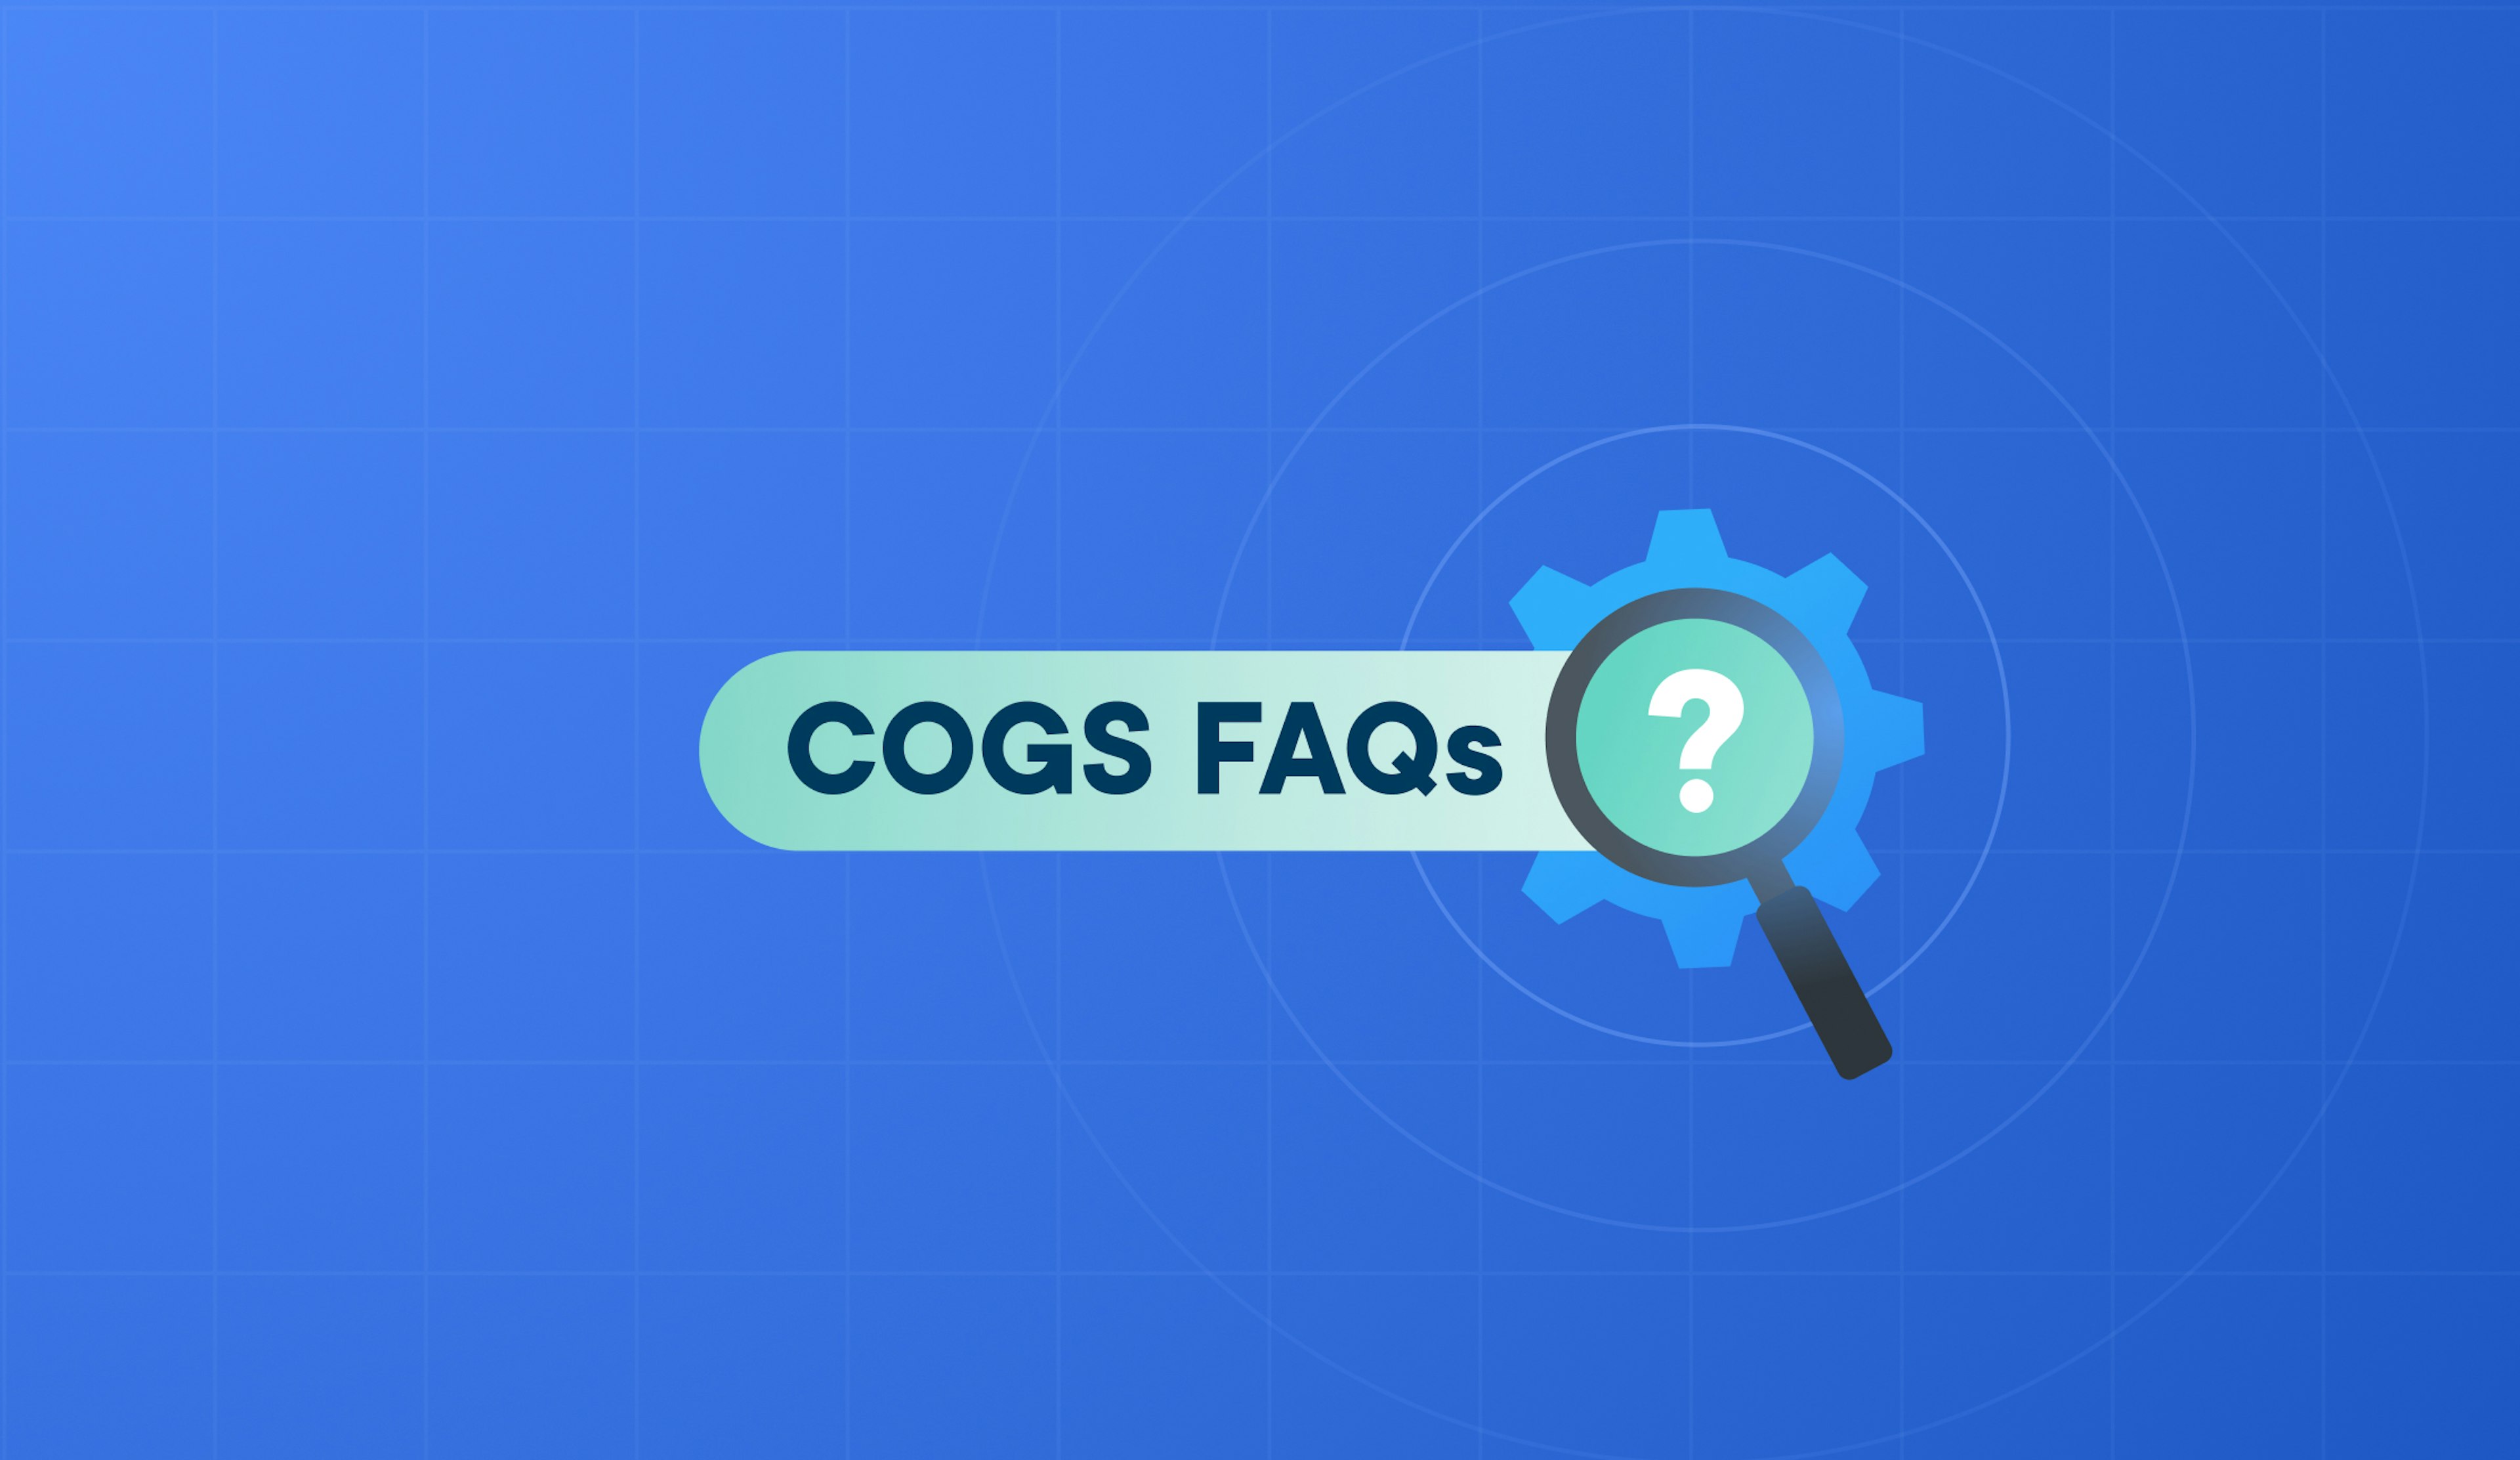 cogs faqs